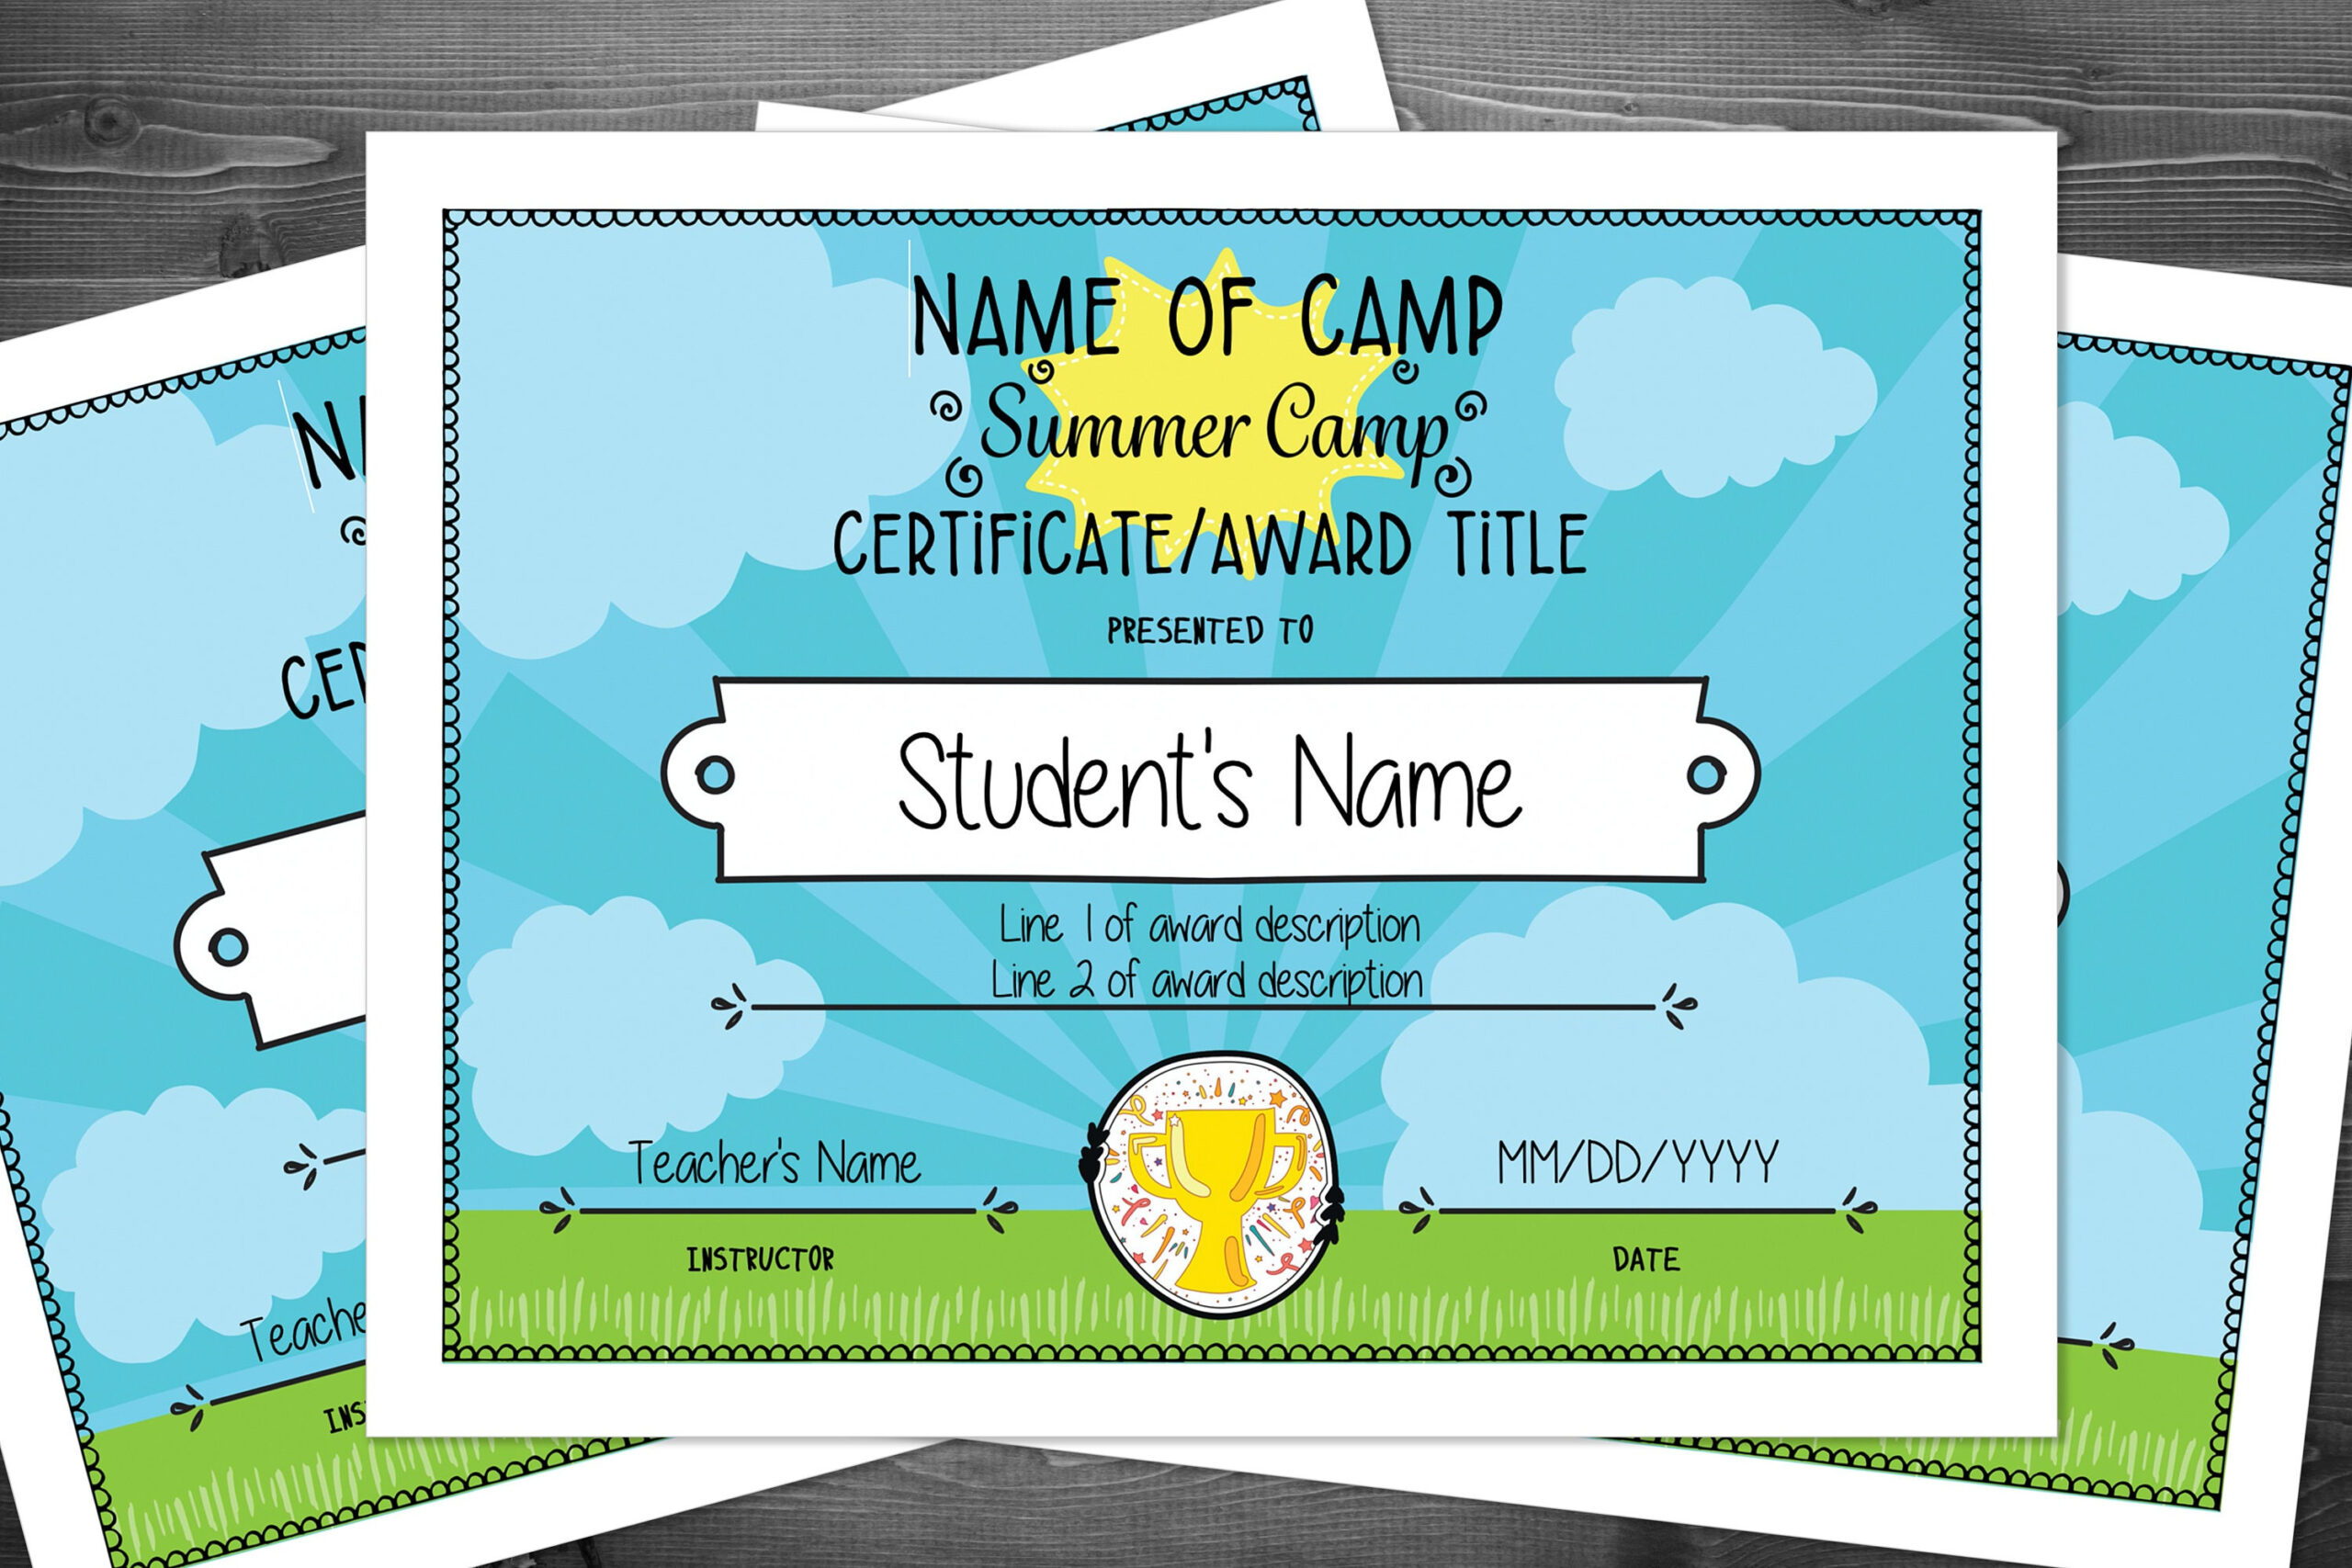 Summer Camp Certificate or Award Template for Kids Digital - Etsy Pertaining To Summer Camp Certificate Template